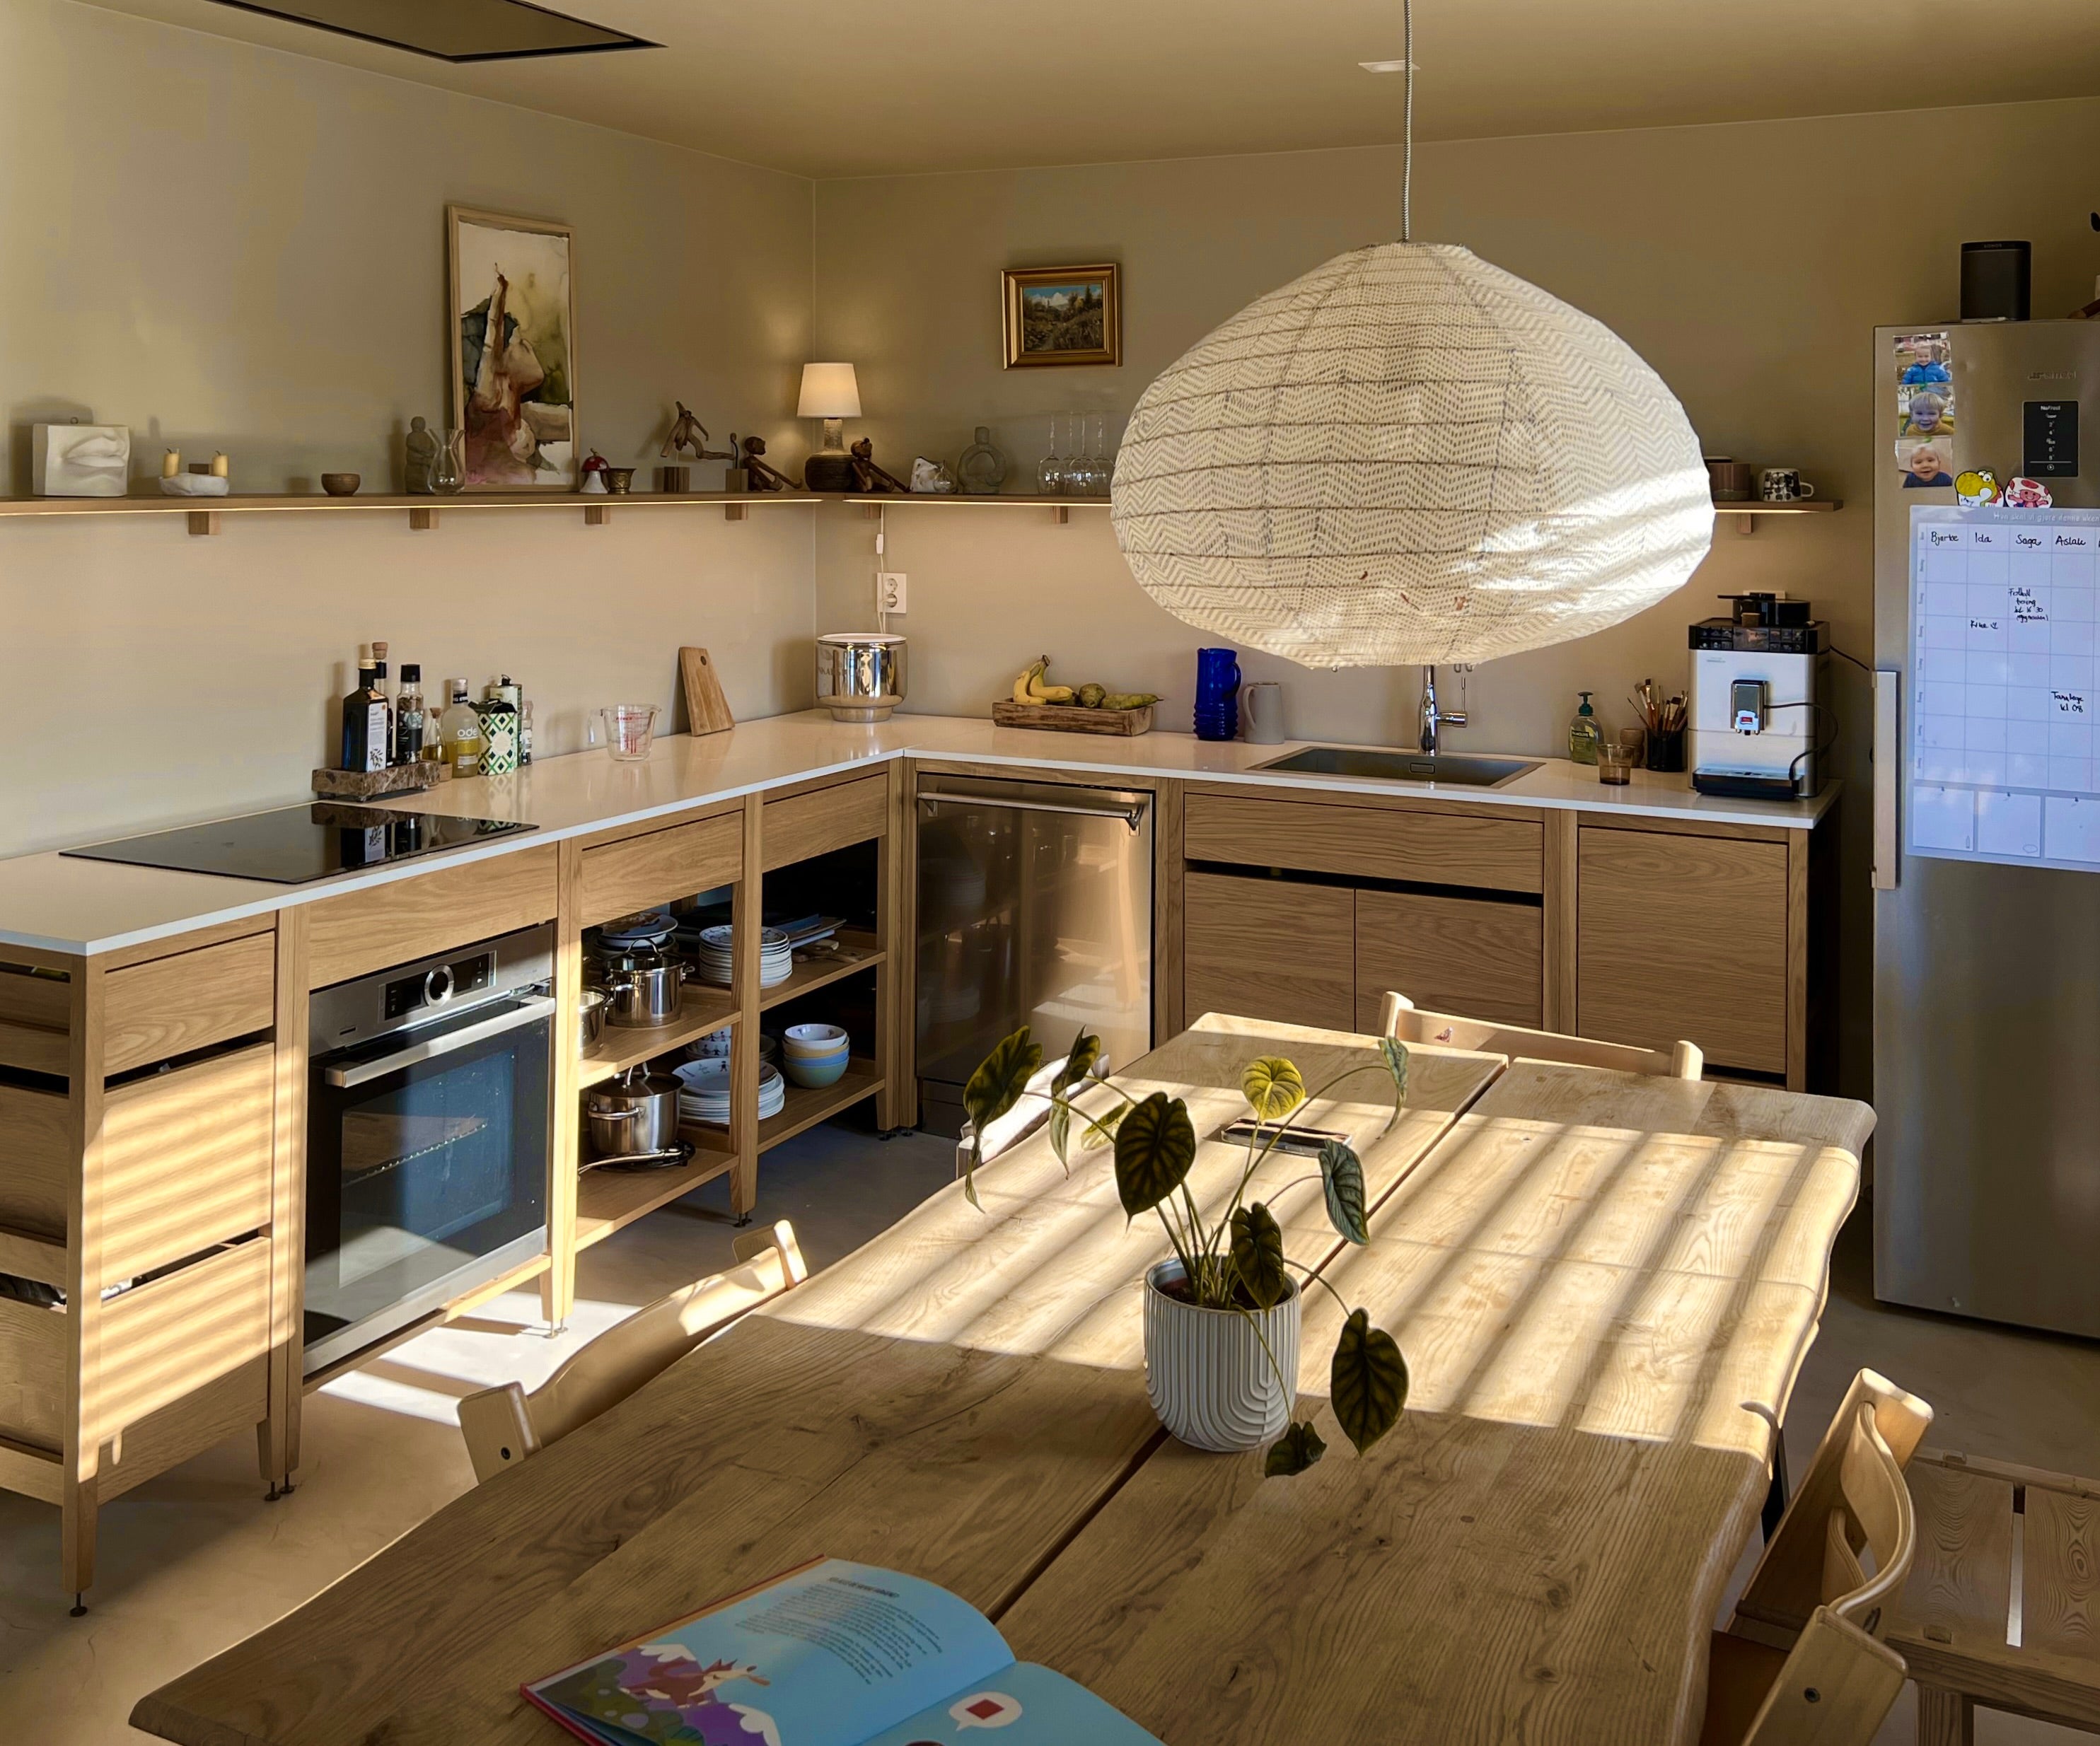 Natural Oak Modular Coquo Kitchen: A perfect blend of functionality and warmth.